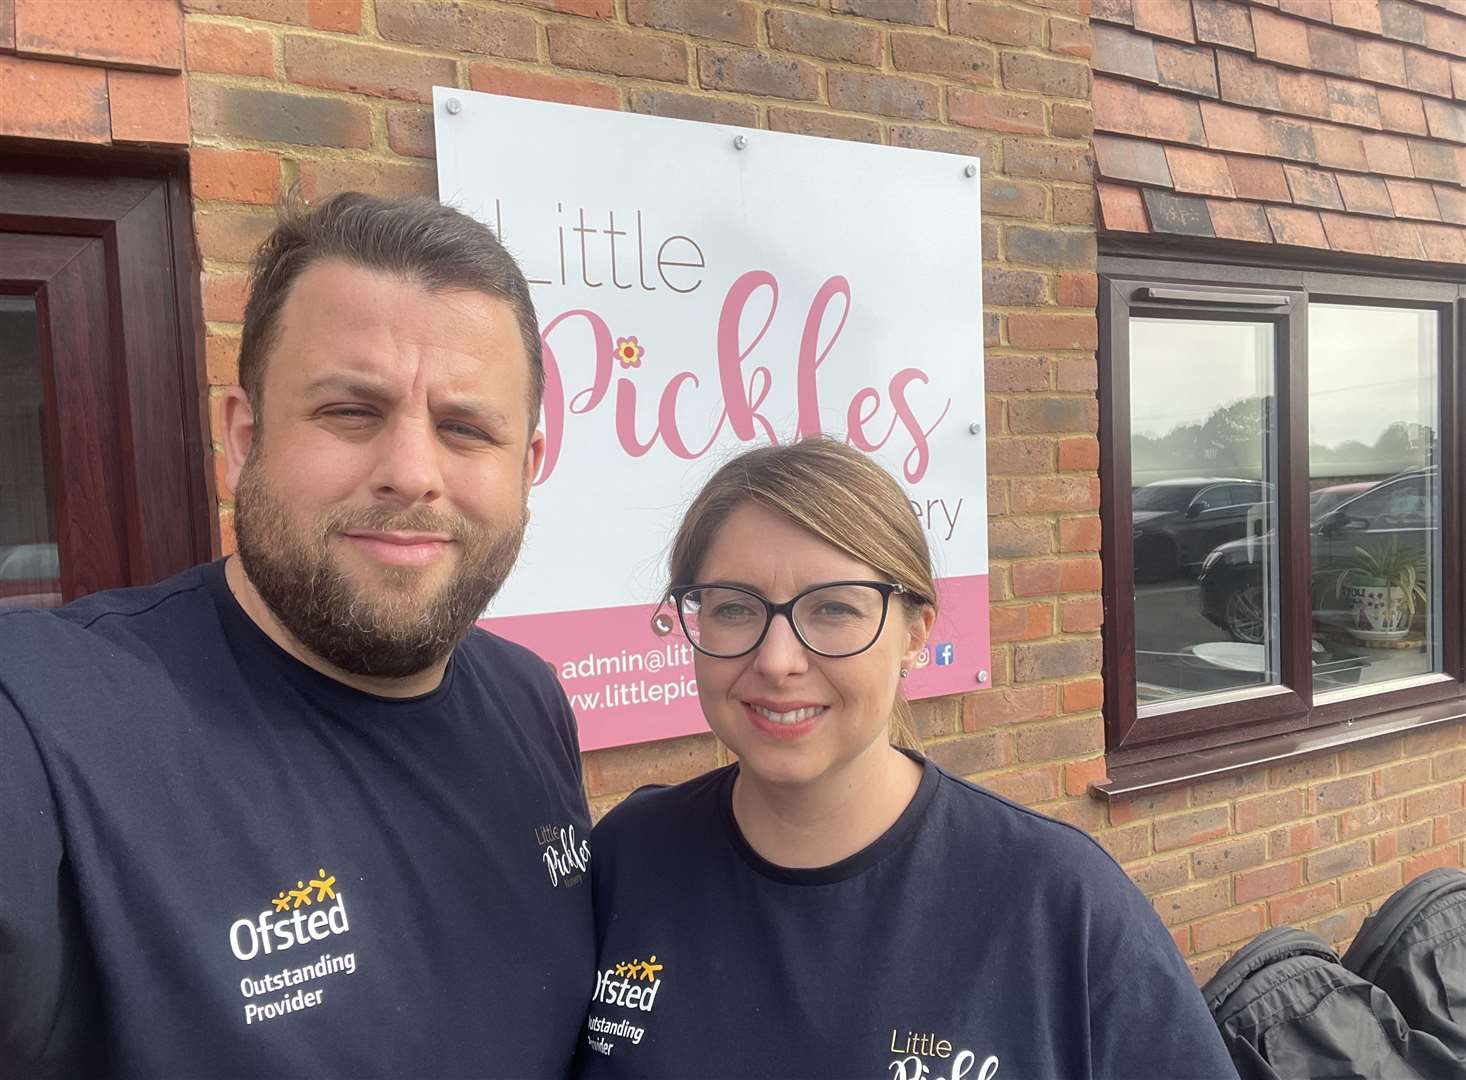 Little Pickles Nursery owners Andy and Katie Holmes. Picture: Little Pickles Nursery